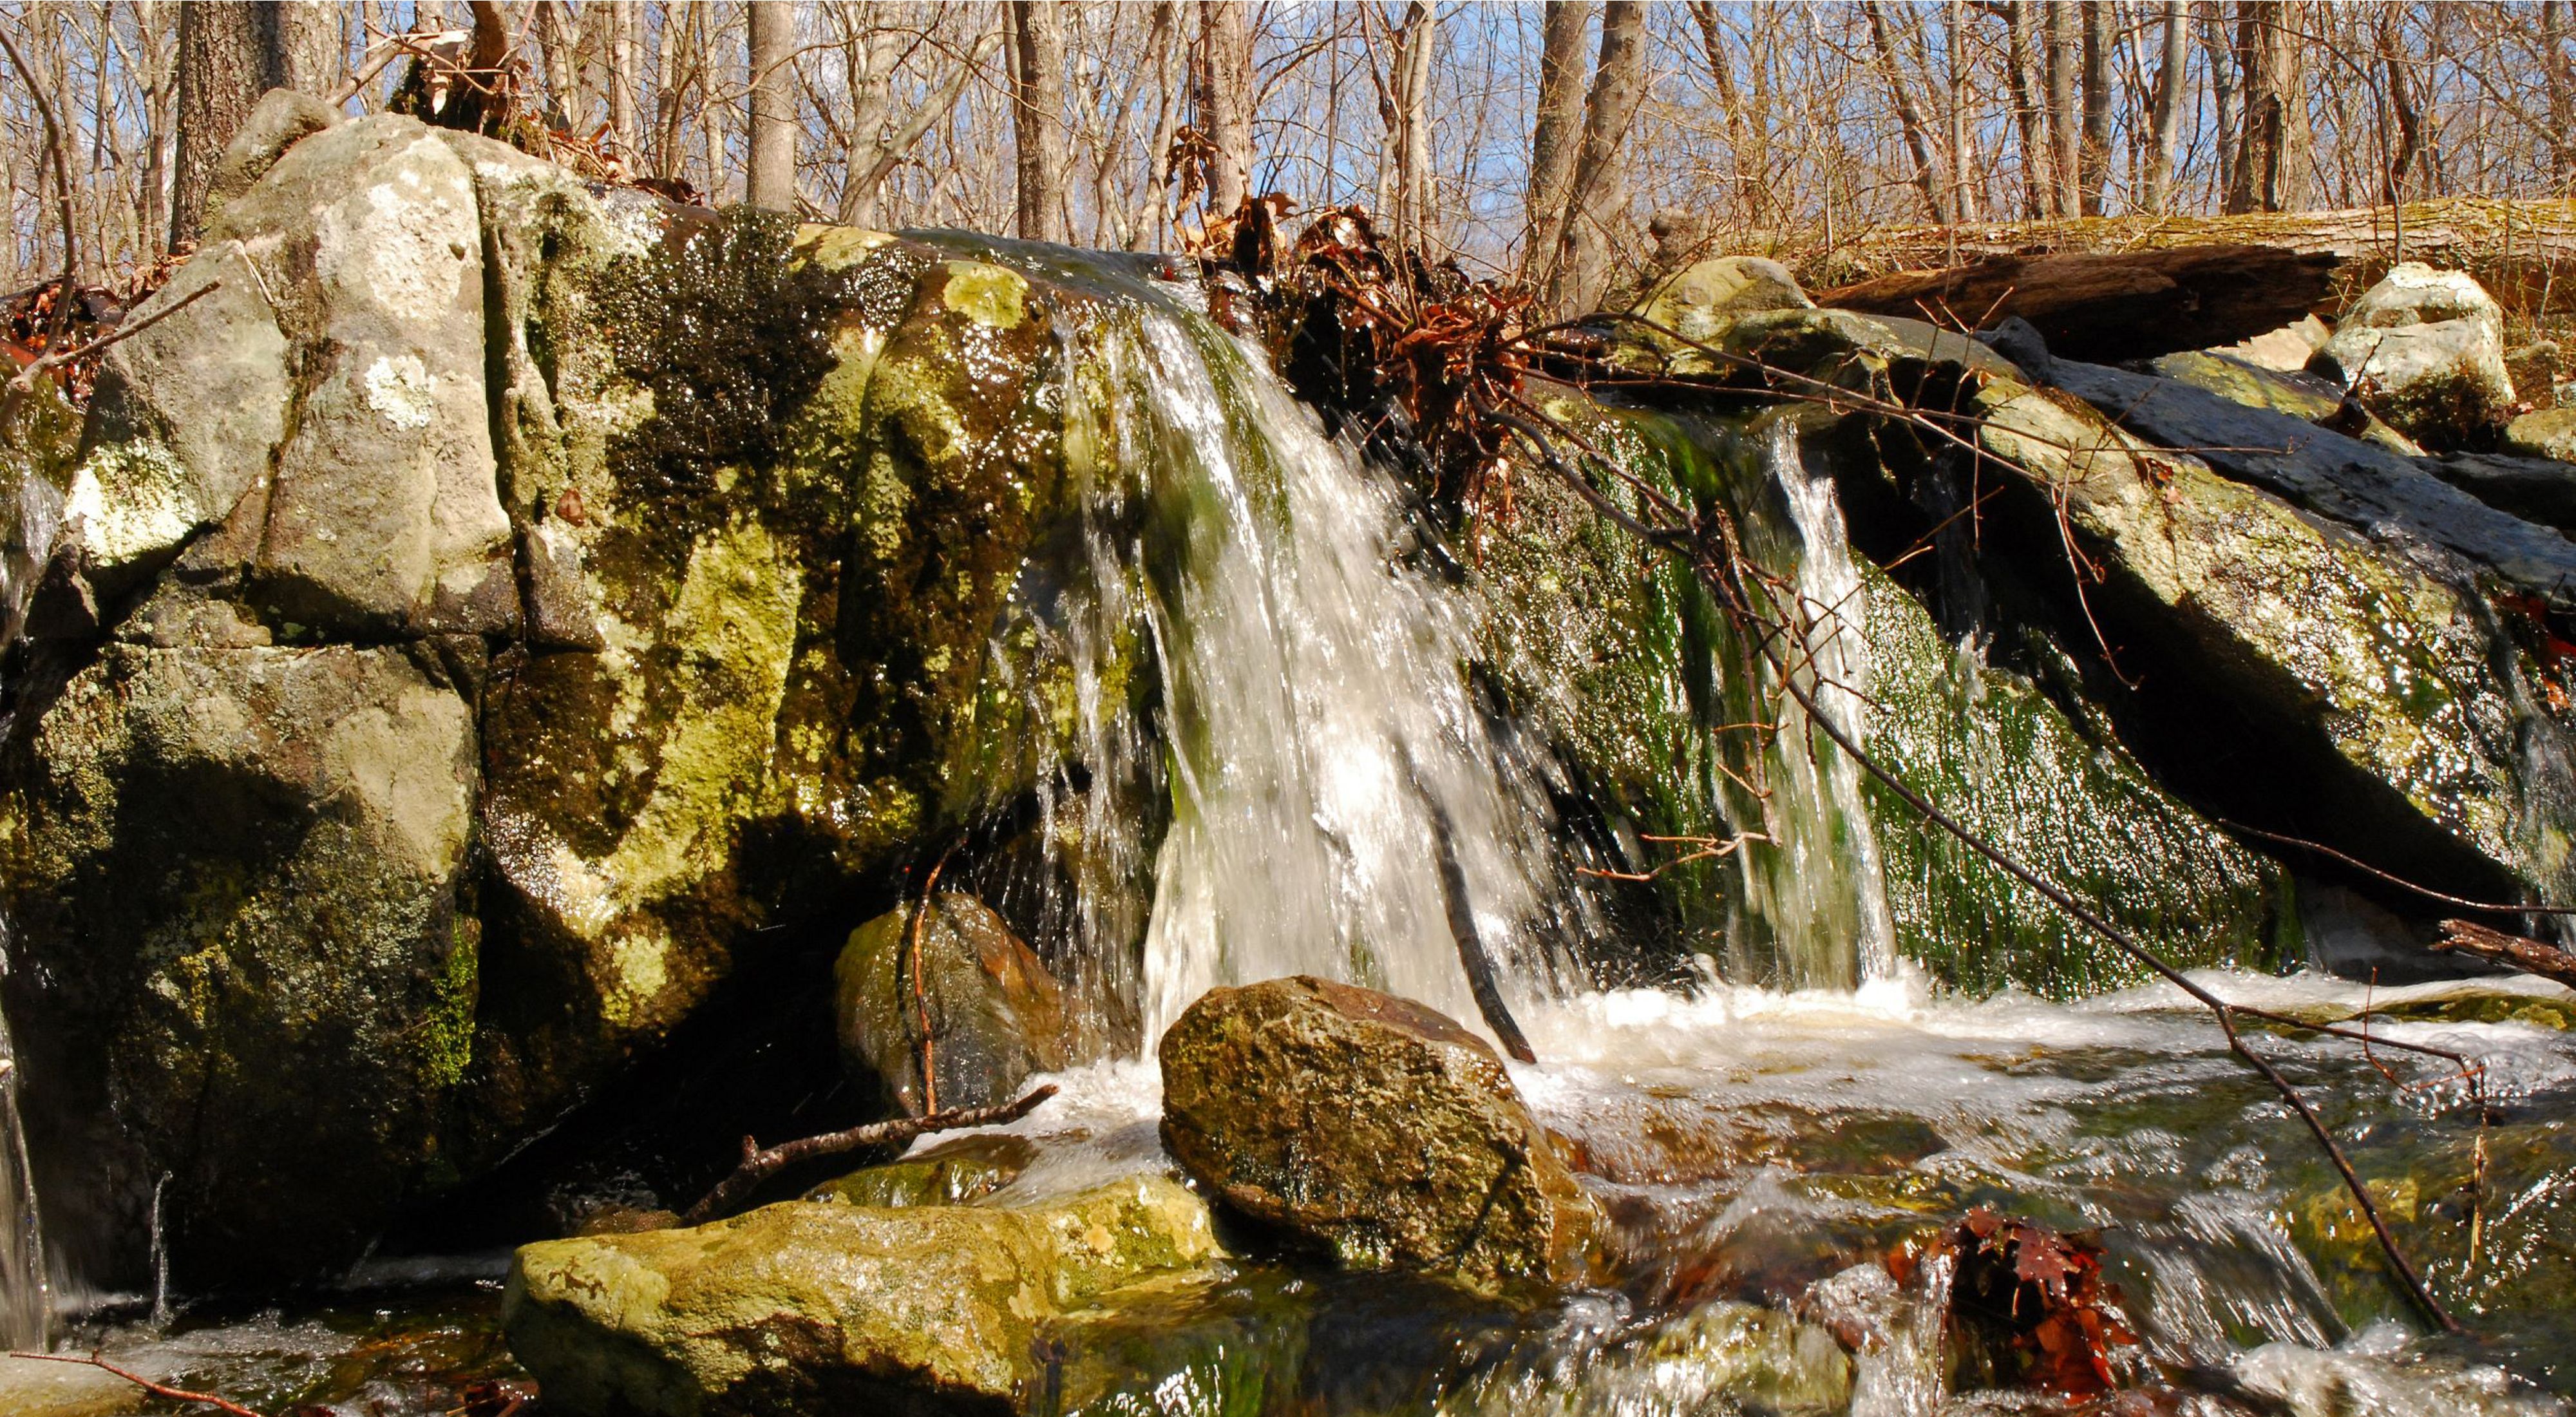 Close-up of a small granite outcrop with water from a seasonal stream spilling over the top.